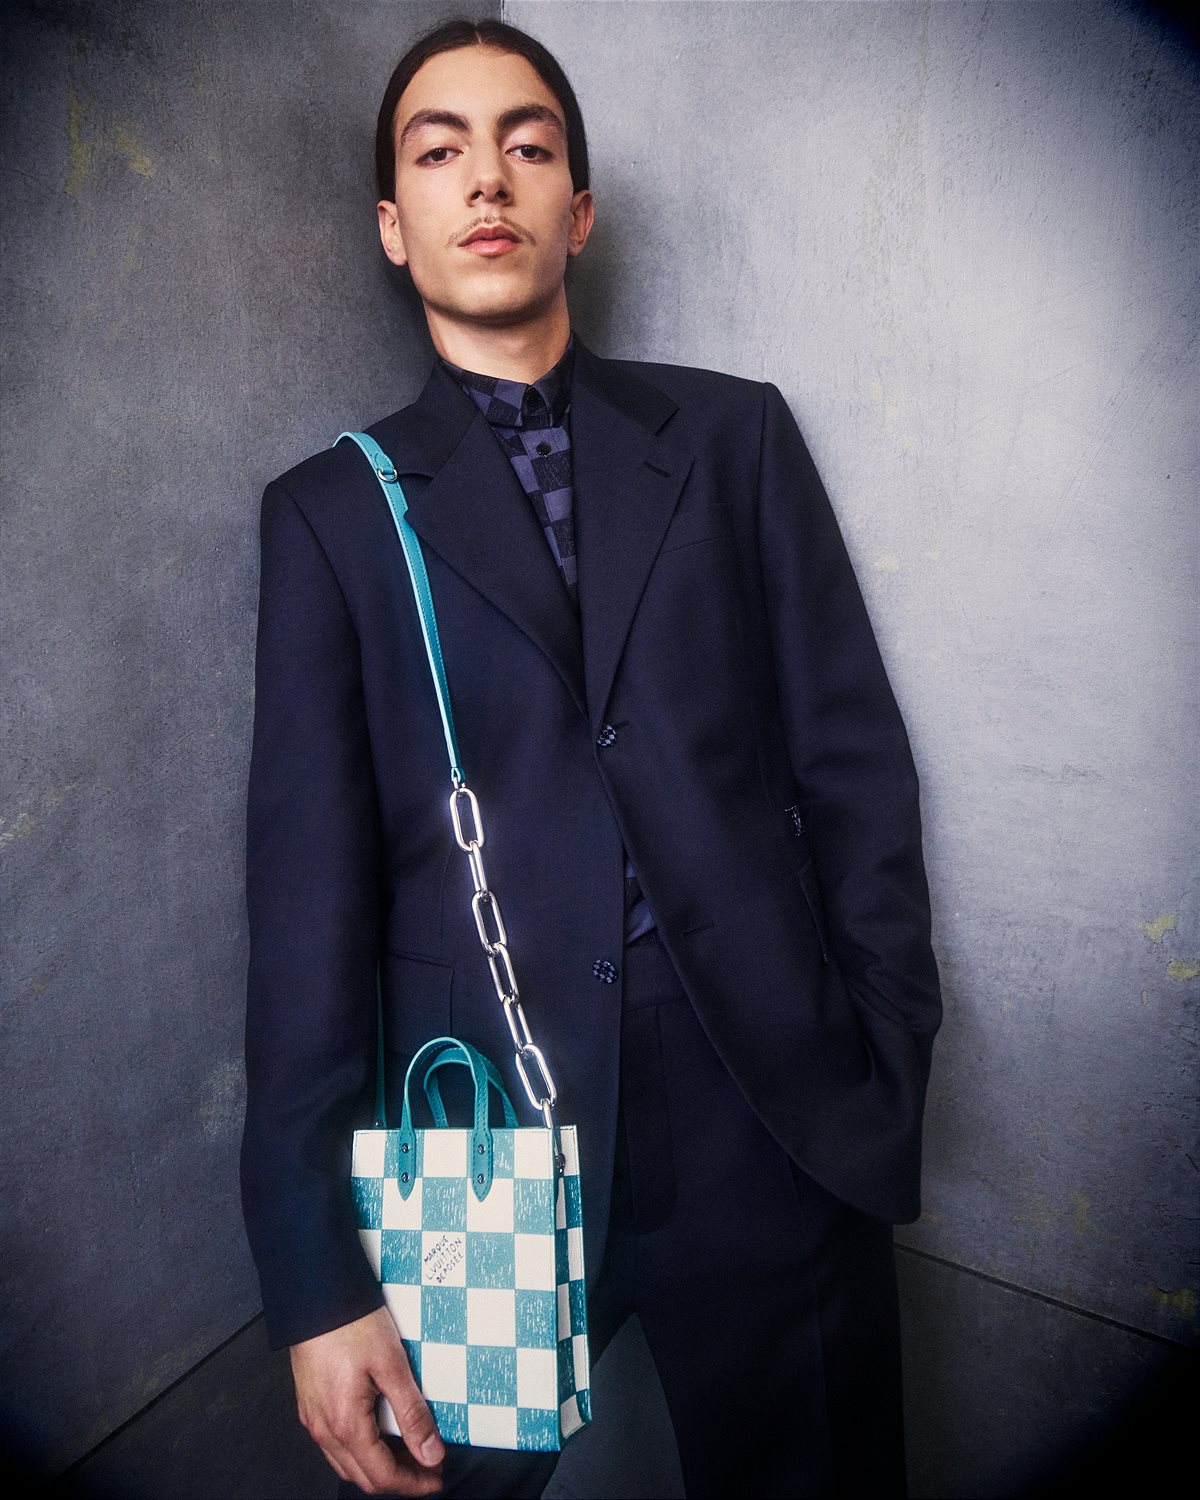 LOUIS VUITTON FALL 2021 MENS COLLECTION LIFESTYLE (6)